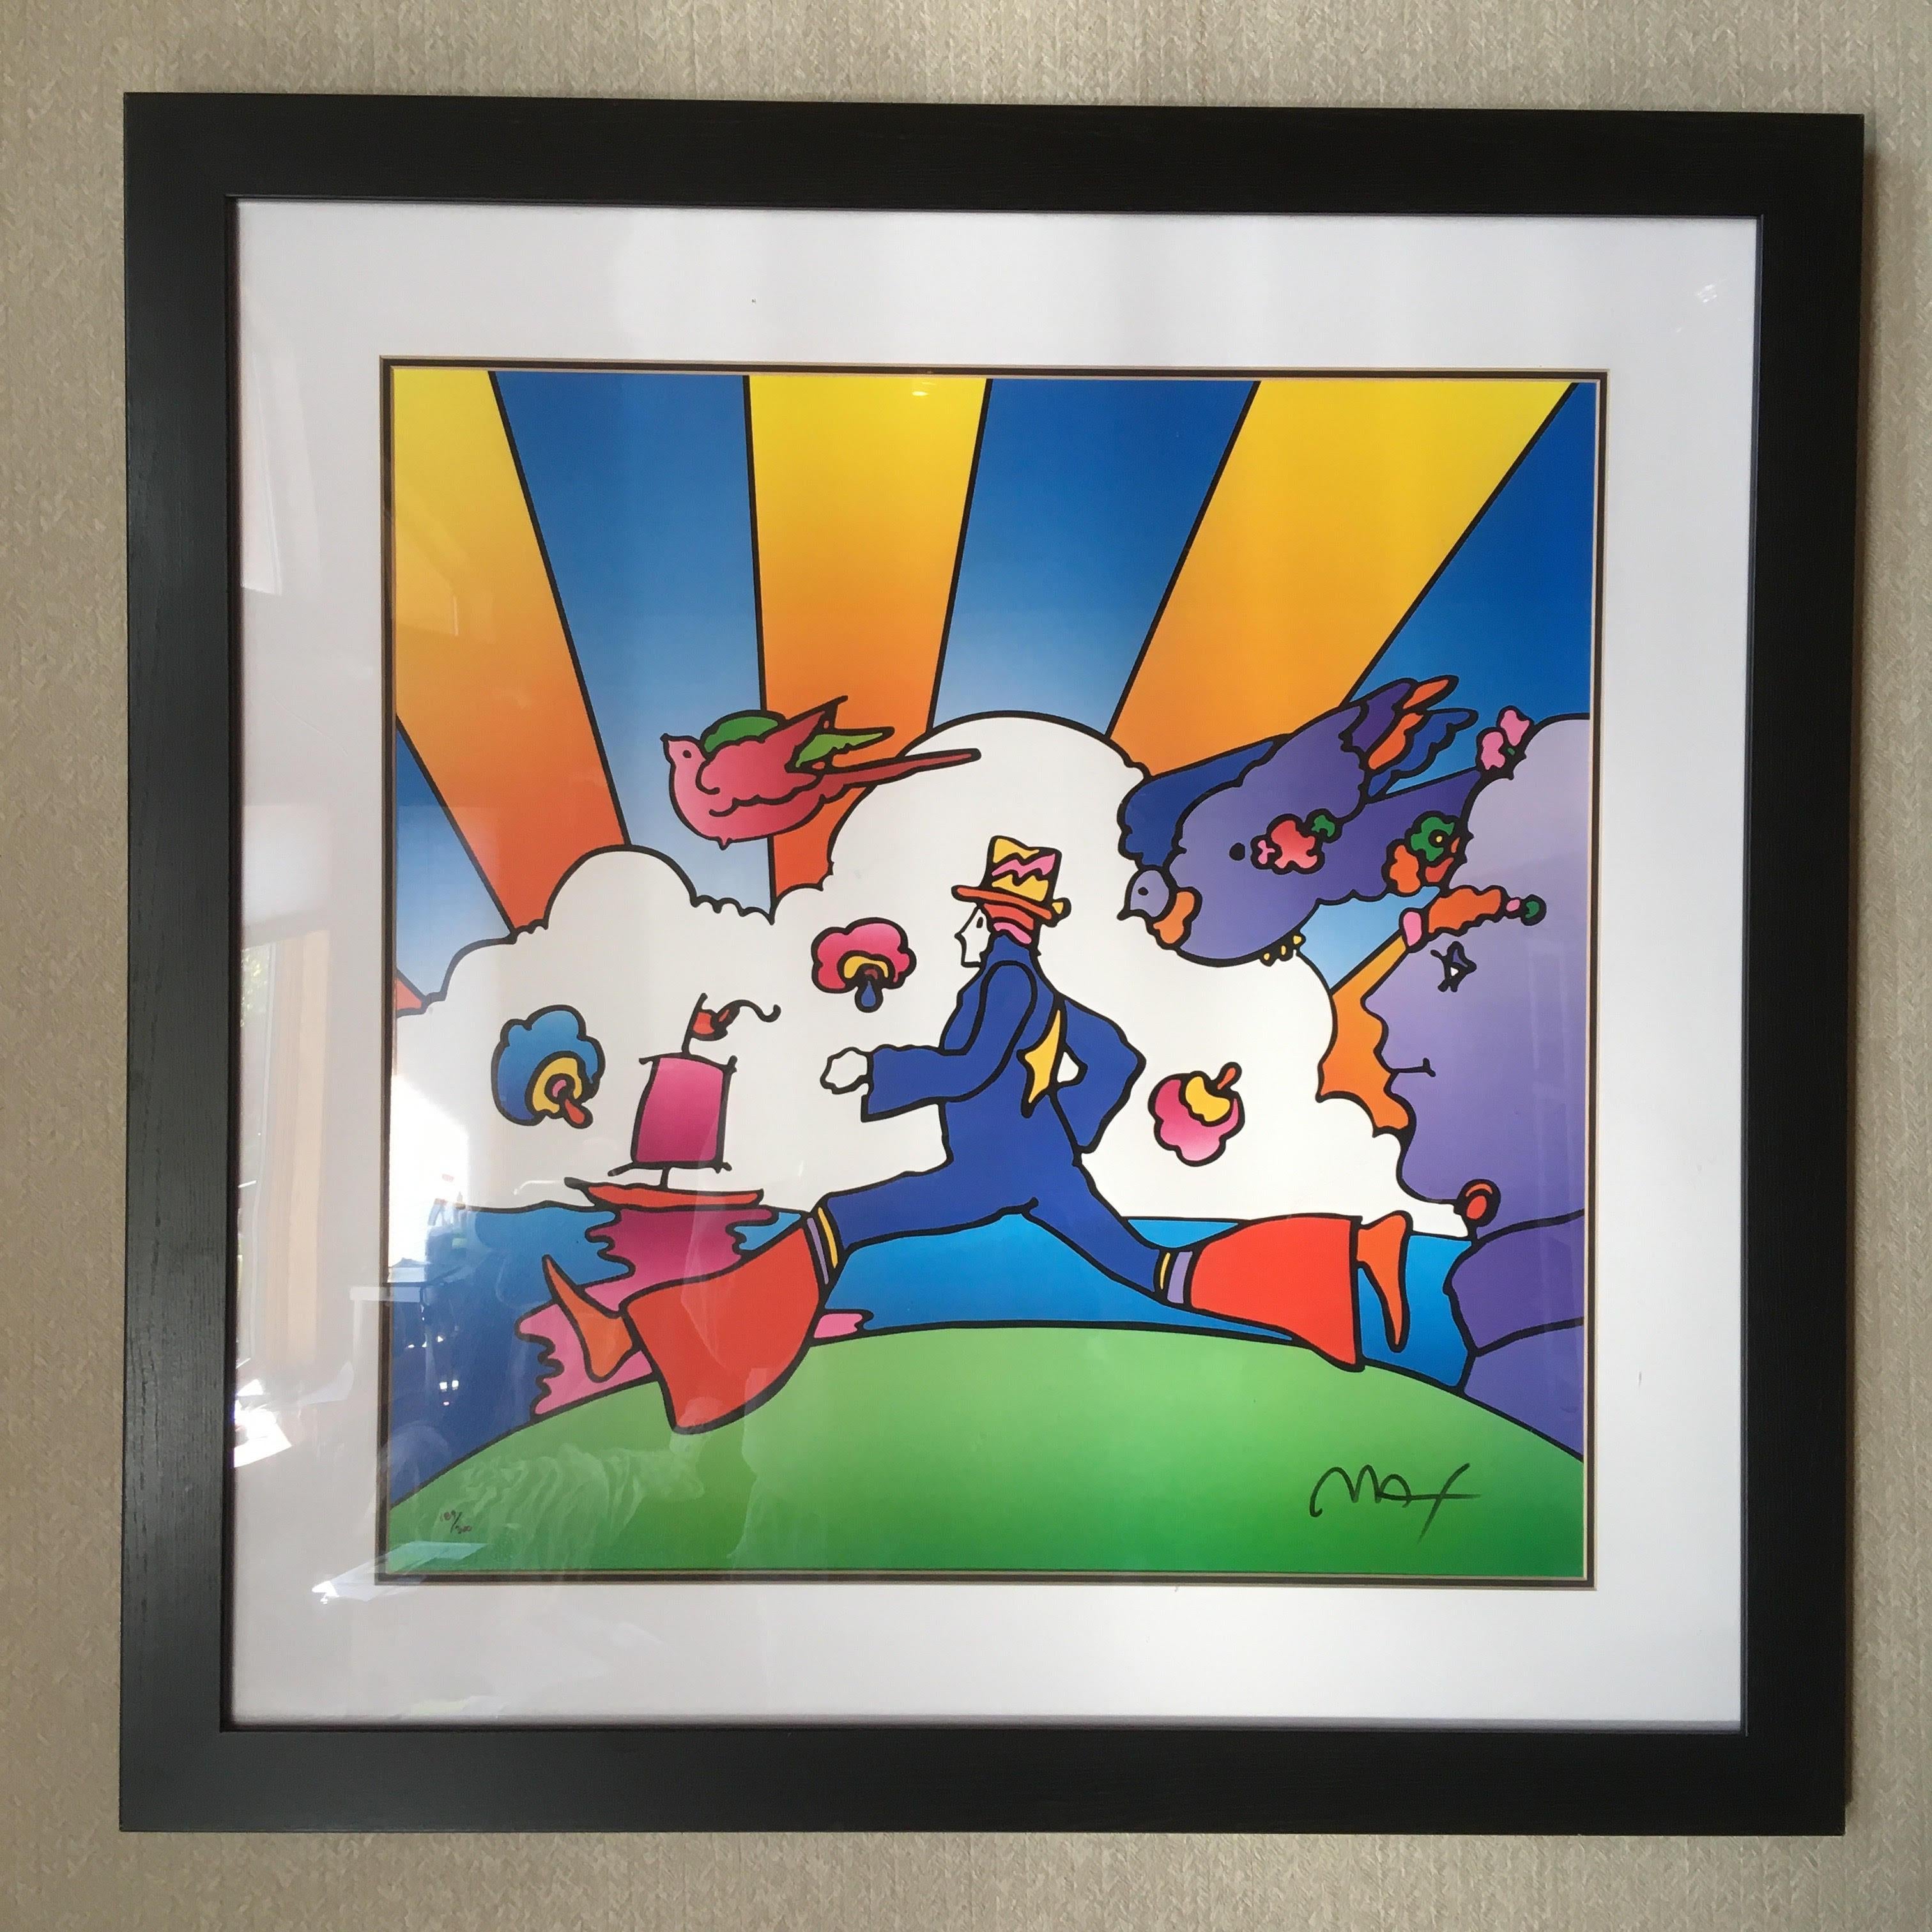 Cosmic Runner - Limited Edition Lithograph by Peter Max